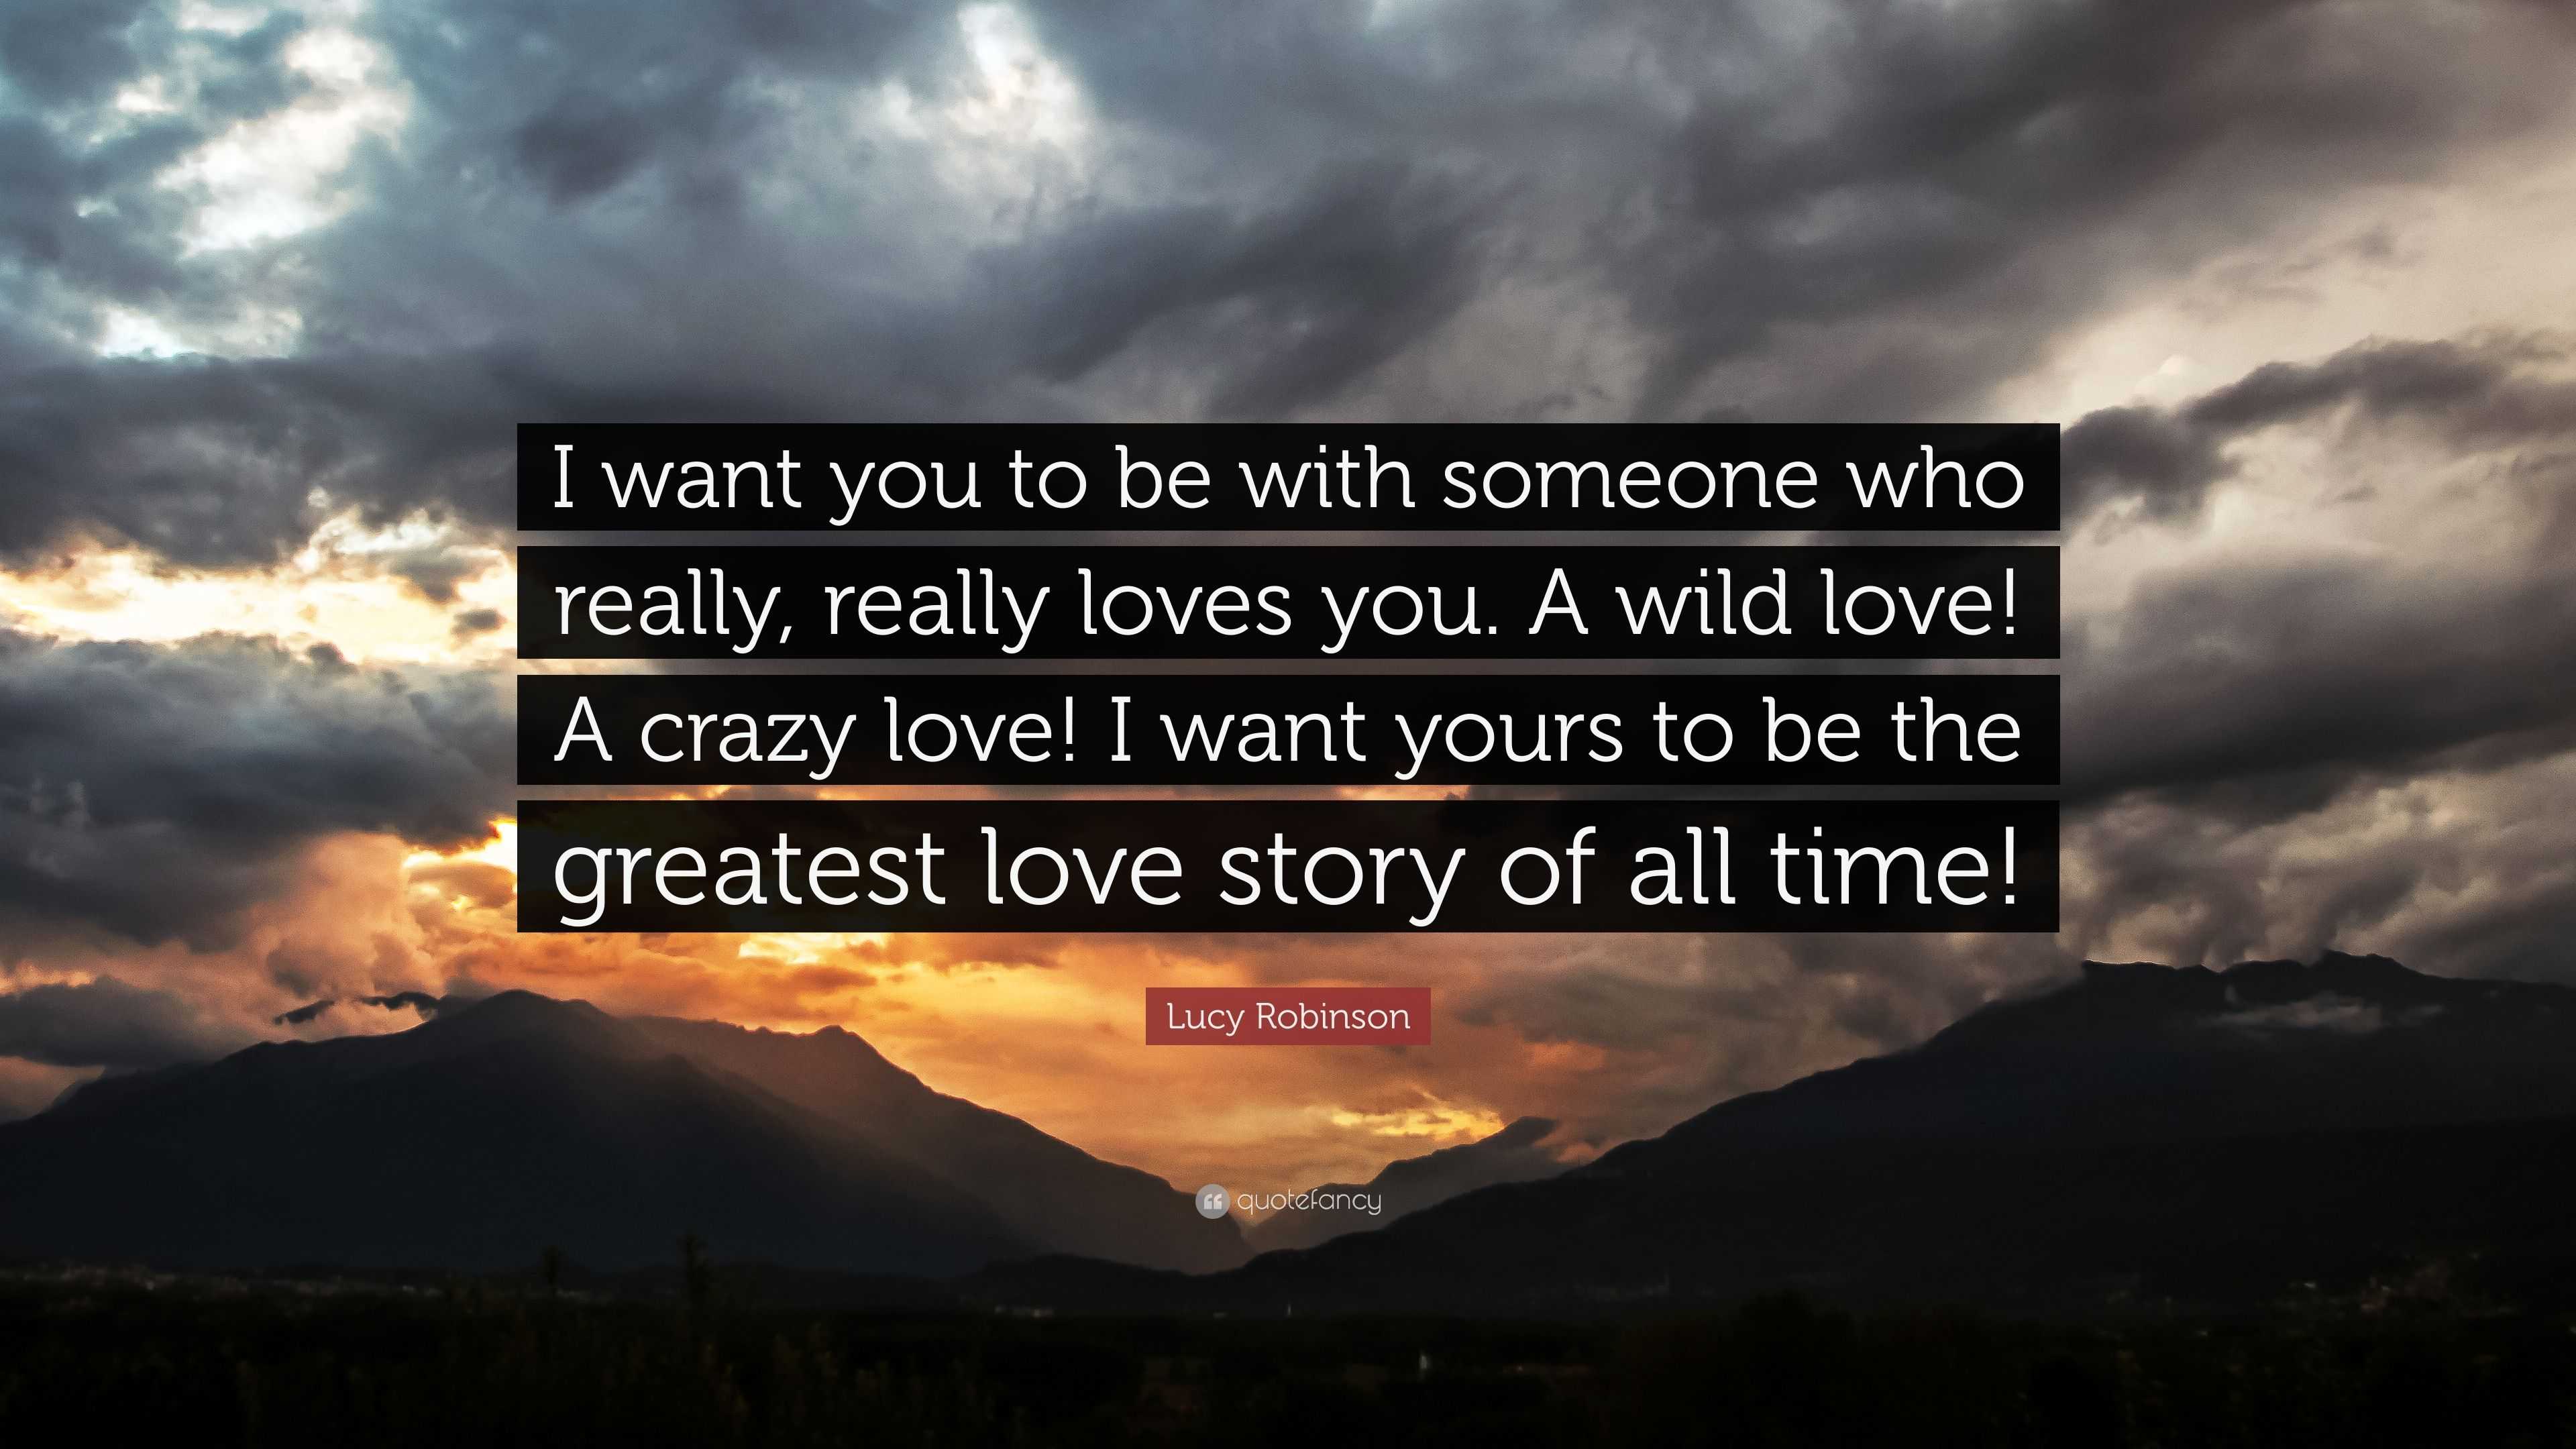 Lucy Robinson Quote “I want you to be with someone who really really